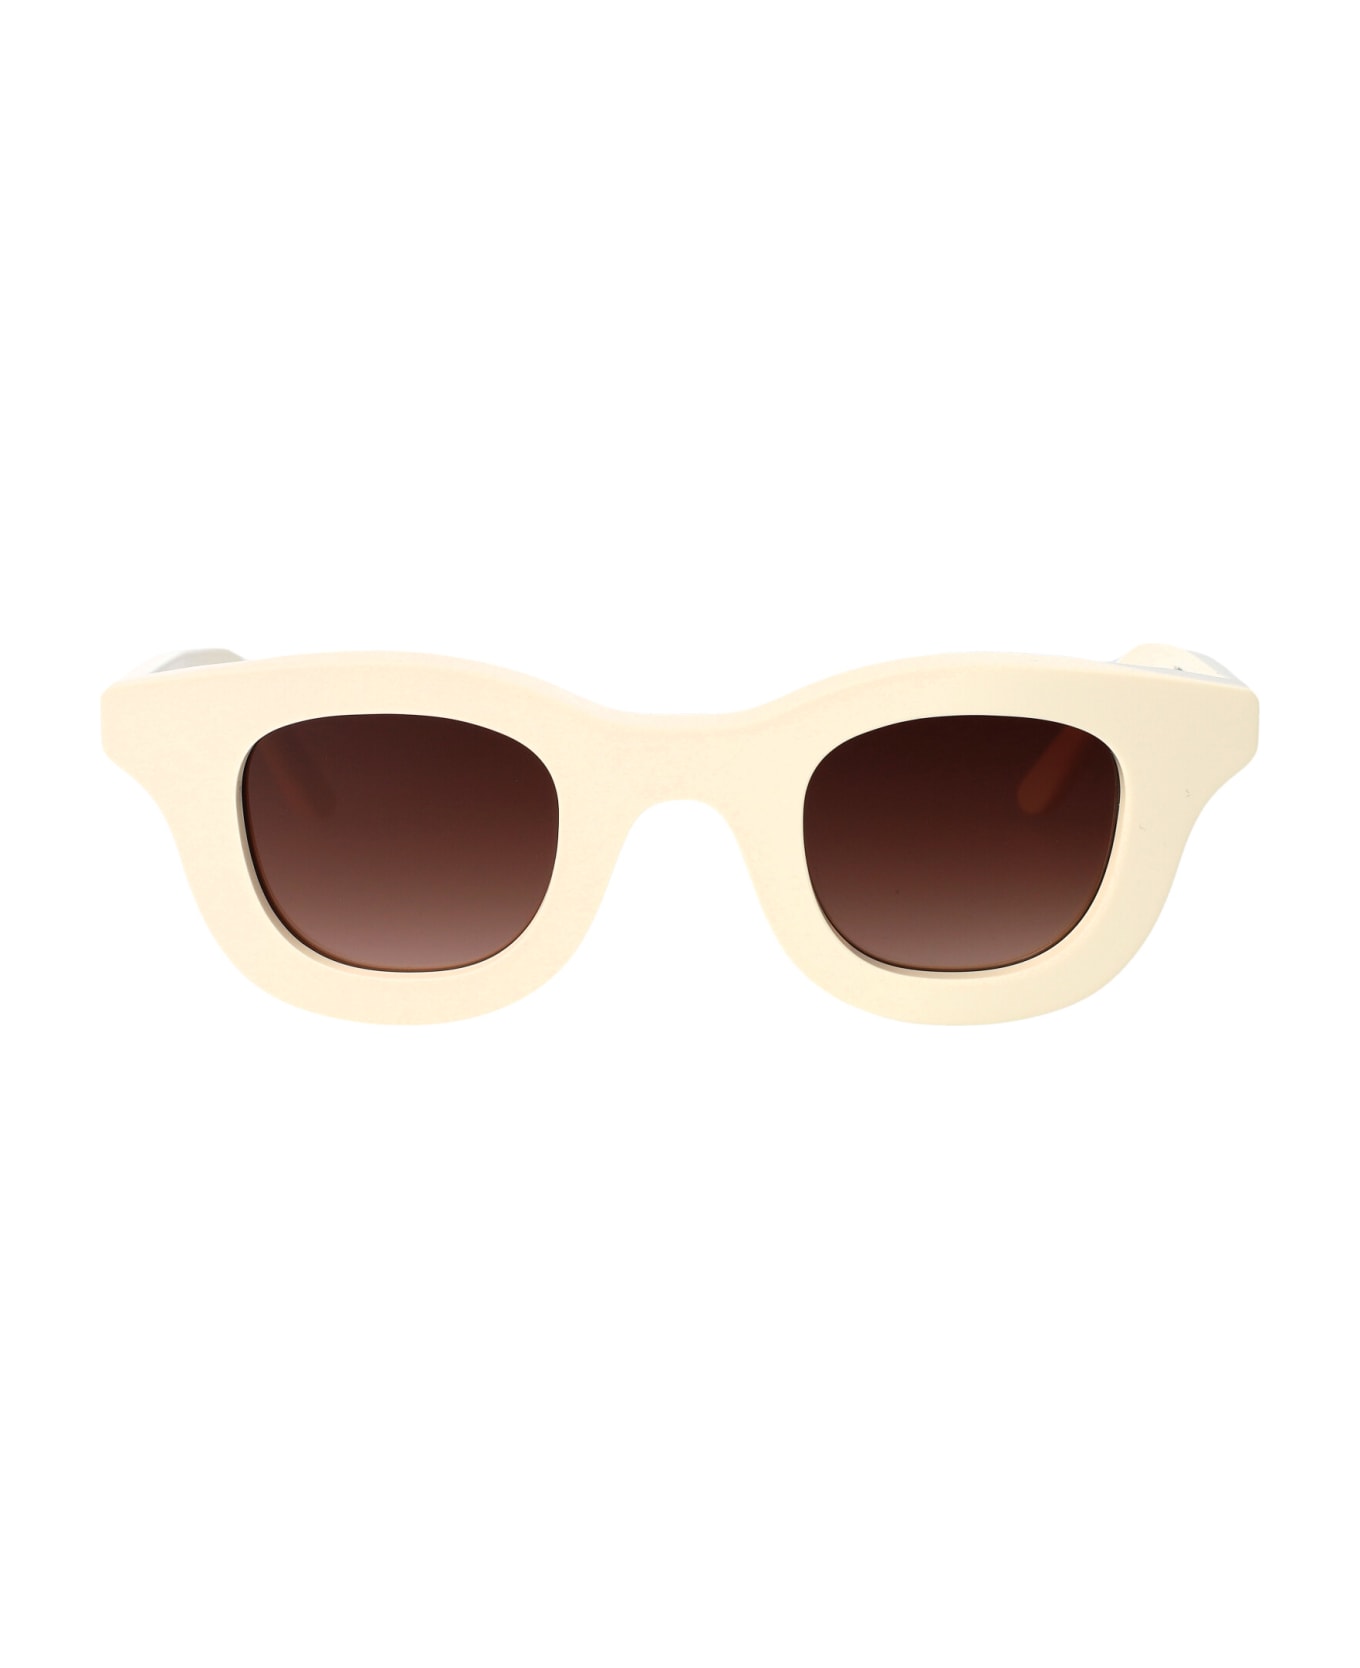 Thierry Lasry Hacktivity Sunglasses - 393 IVORY